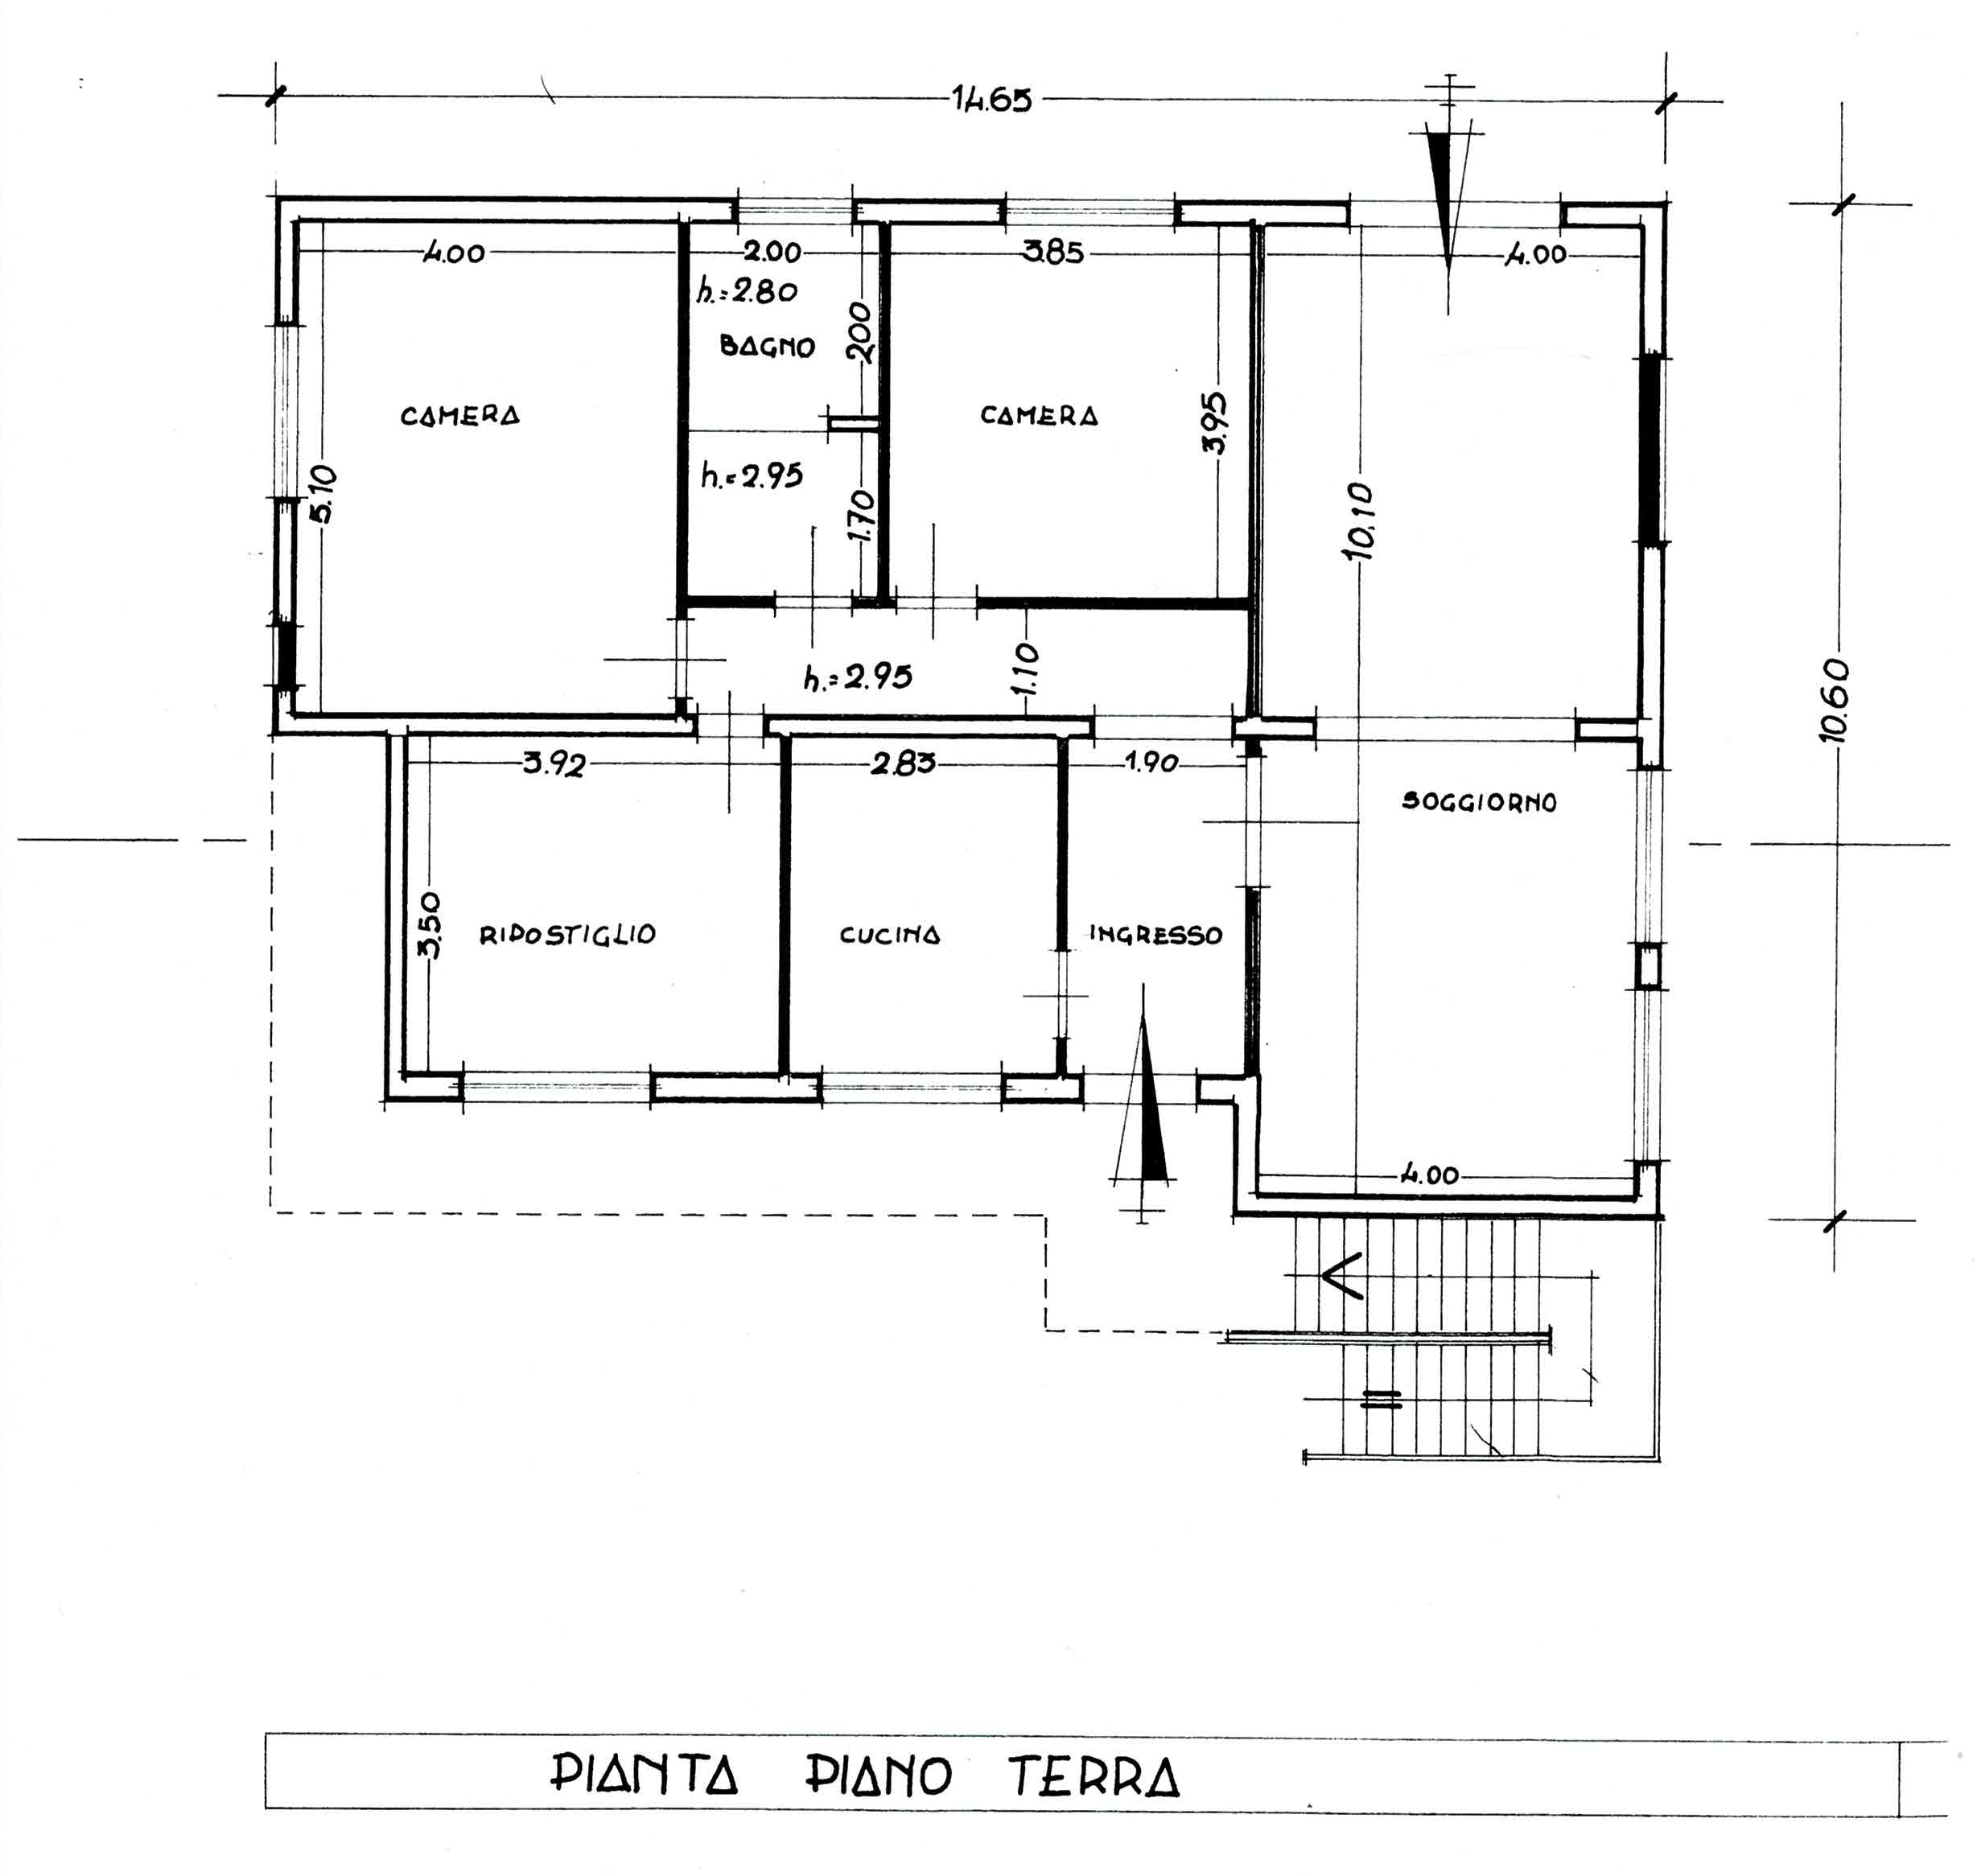 Plan 1/2 for ref. 8851